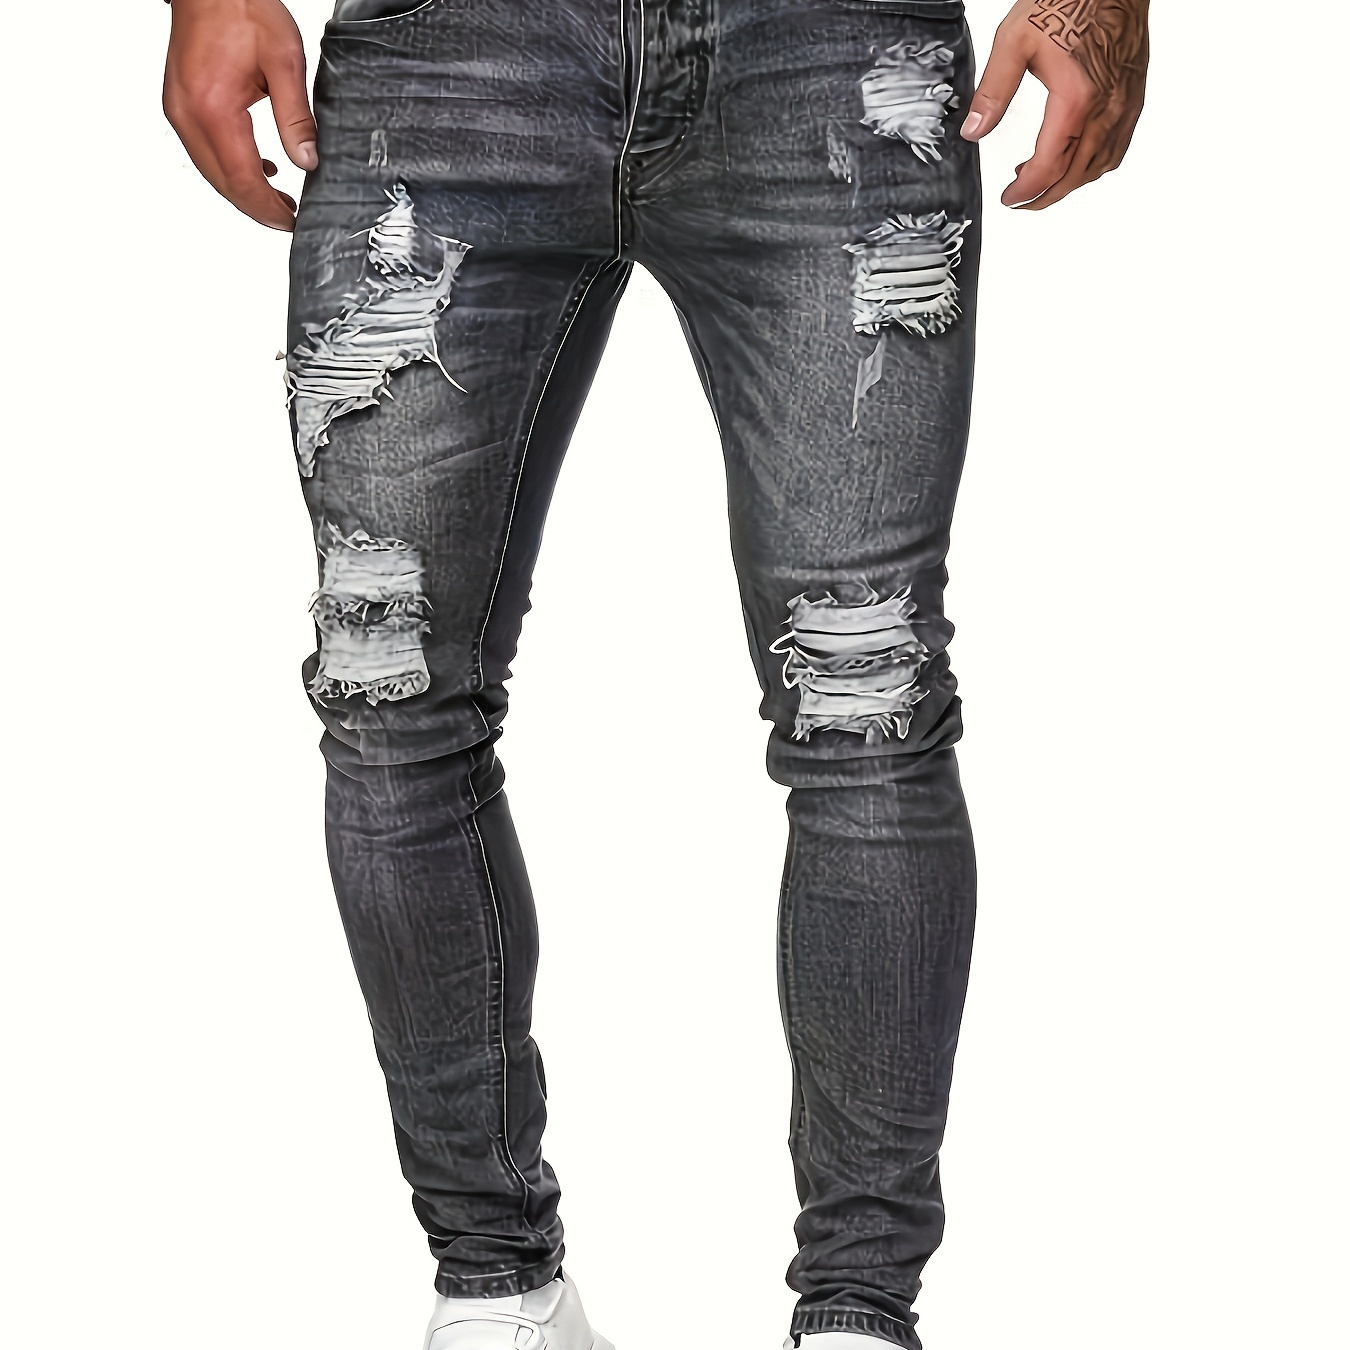 

Slim Fit Ripped Cotton Jeans, Men's Casual Street Style Distressed Mid Stretch Denim Pants For Spring Summer